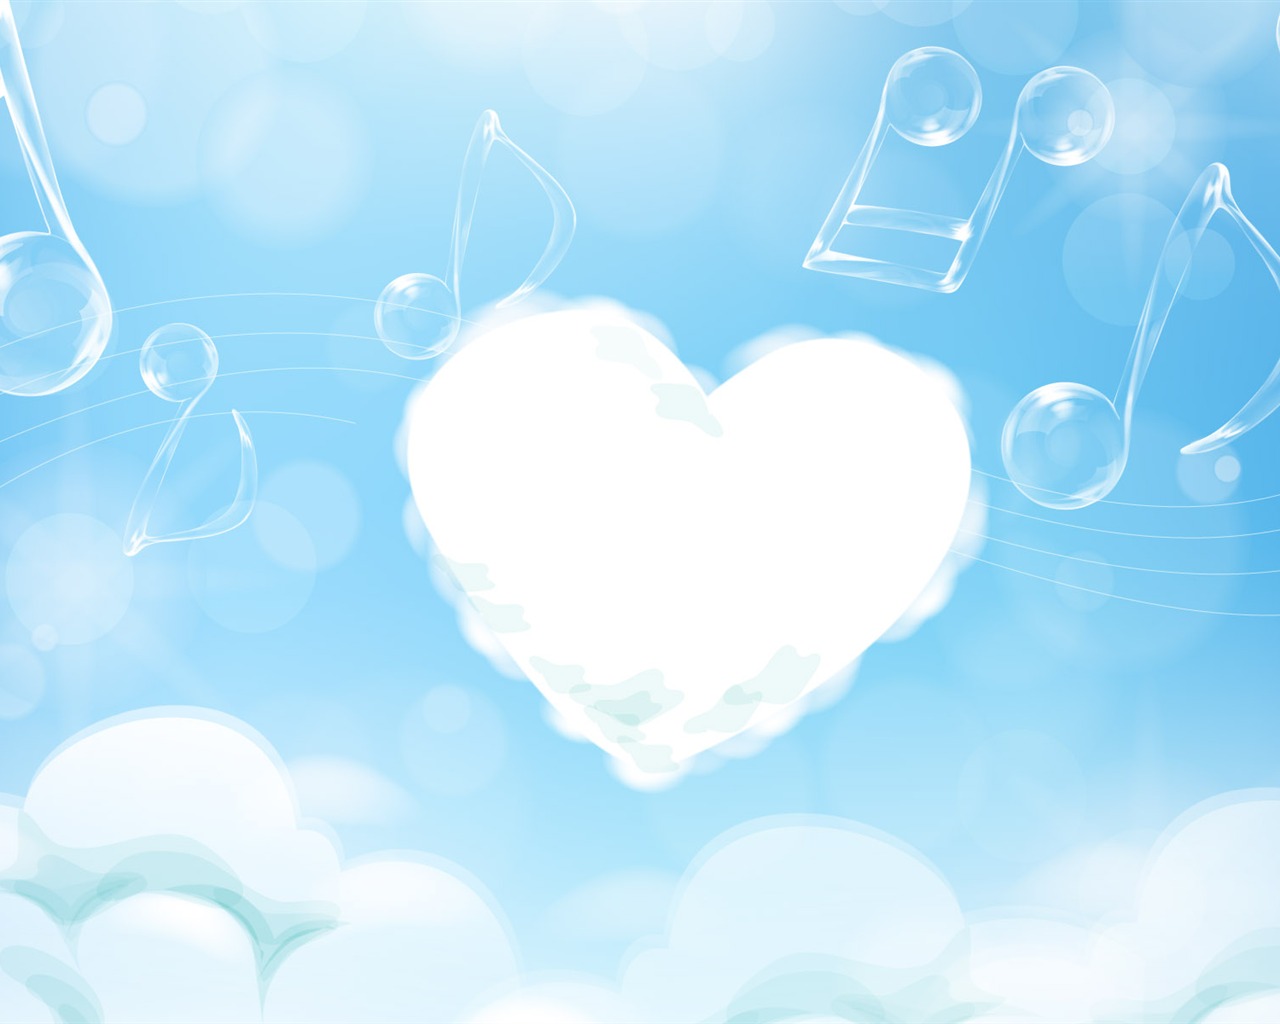 Valentine's Day Love Theme Wallpapers (3) #2 - 1280x1024